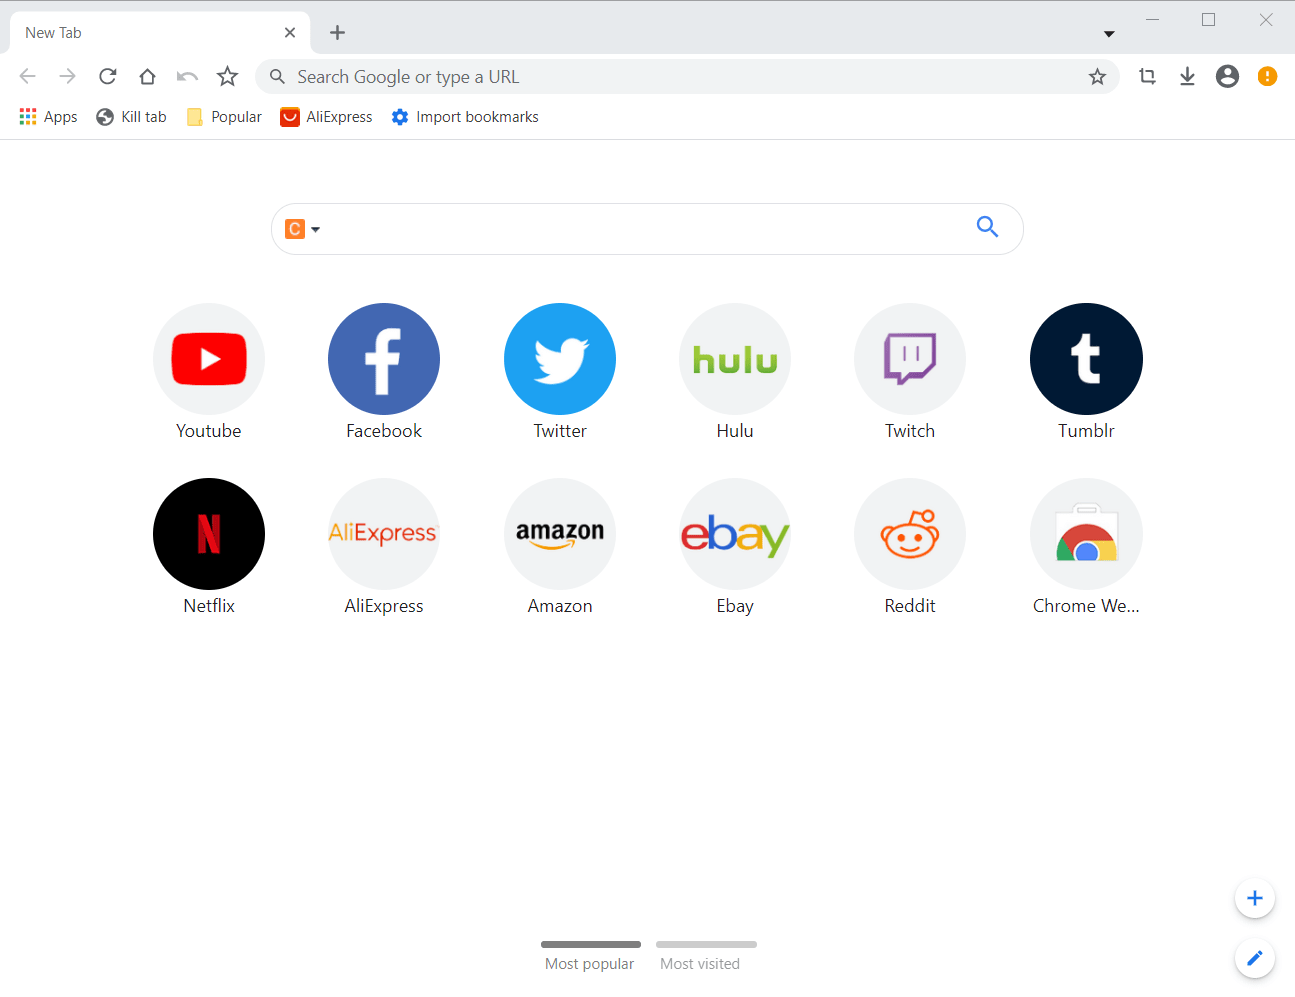 Cent Browser